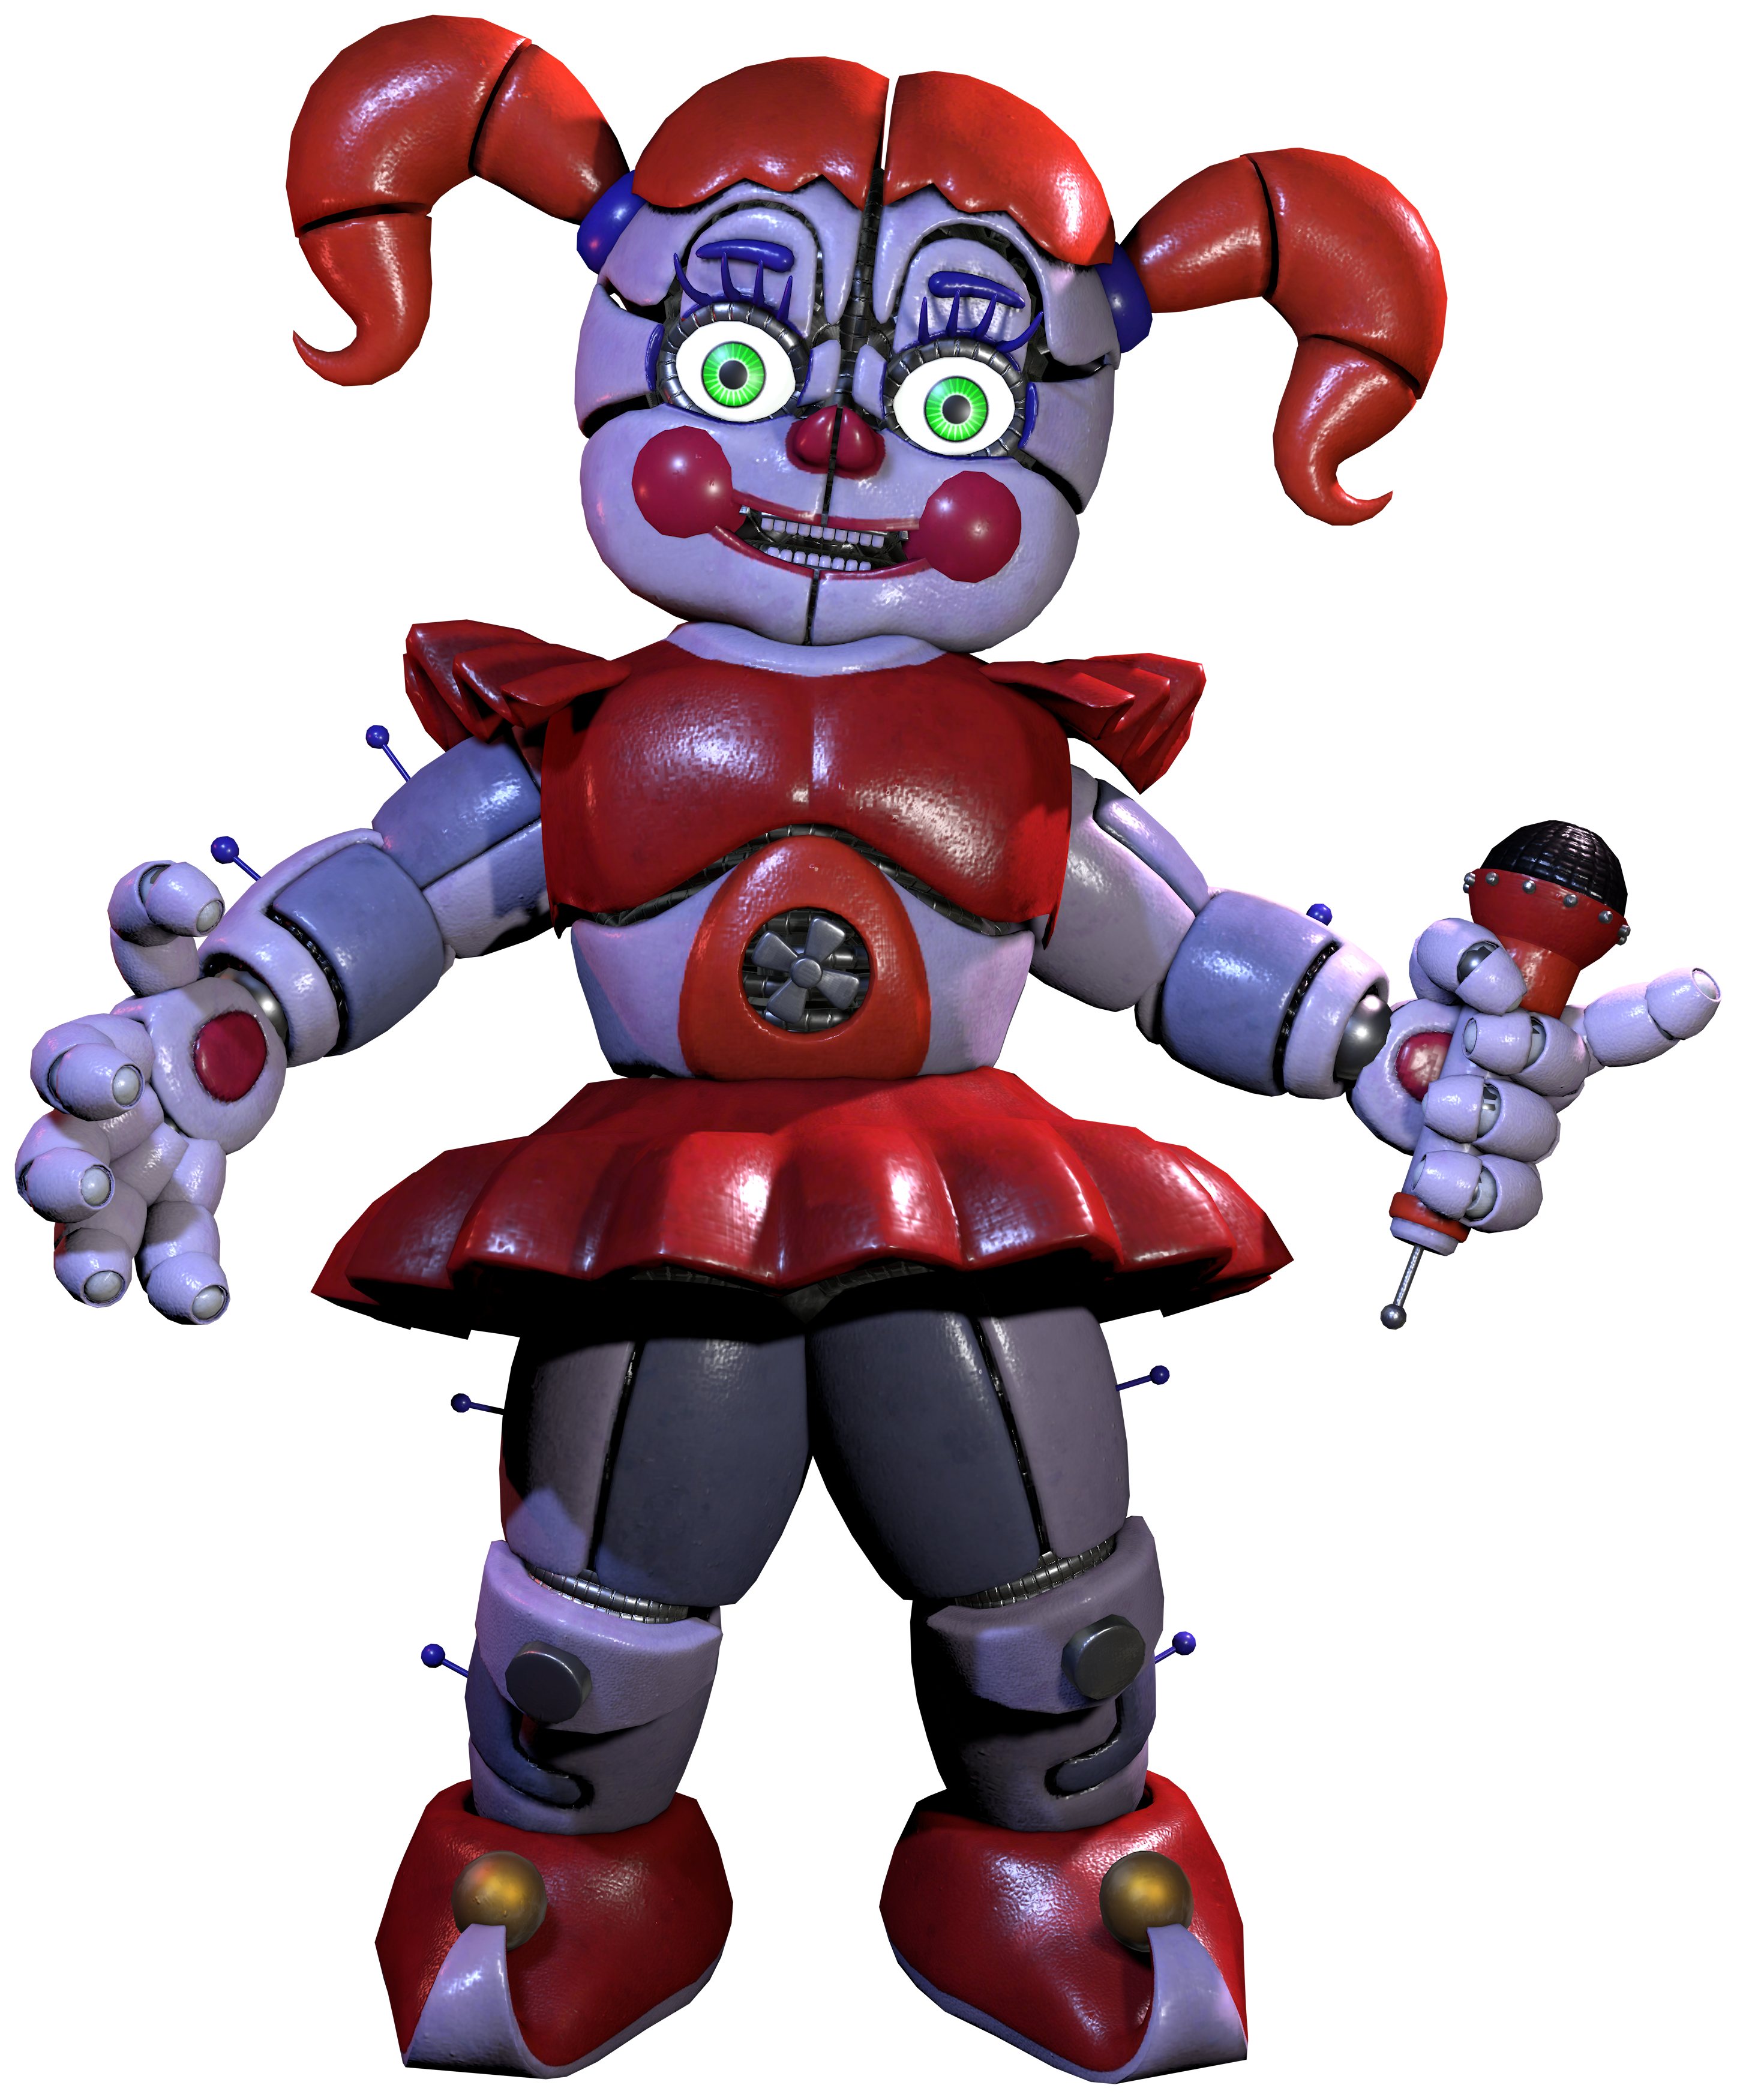 The BABY Animatronic REVEALED.  Five Nights at Freddys Sister